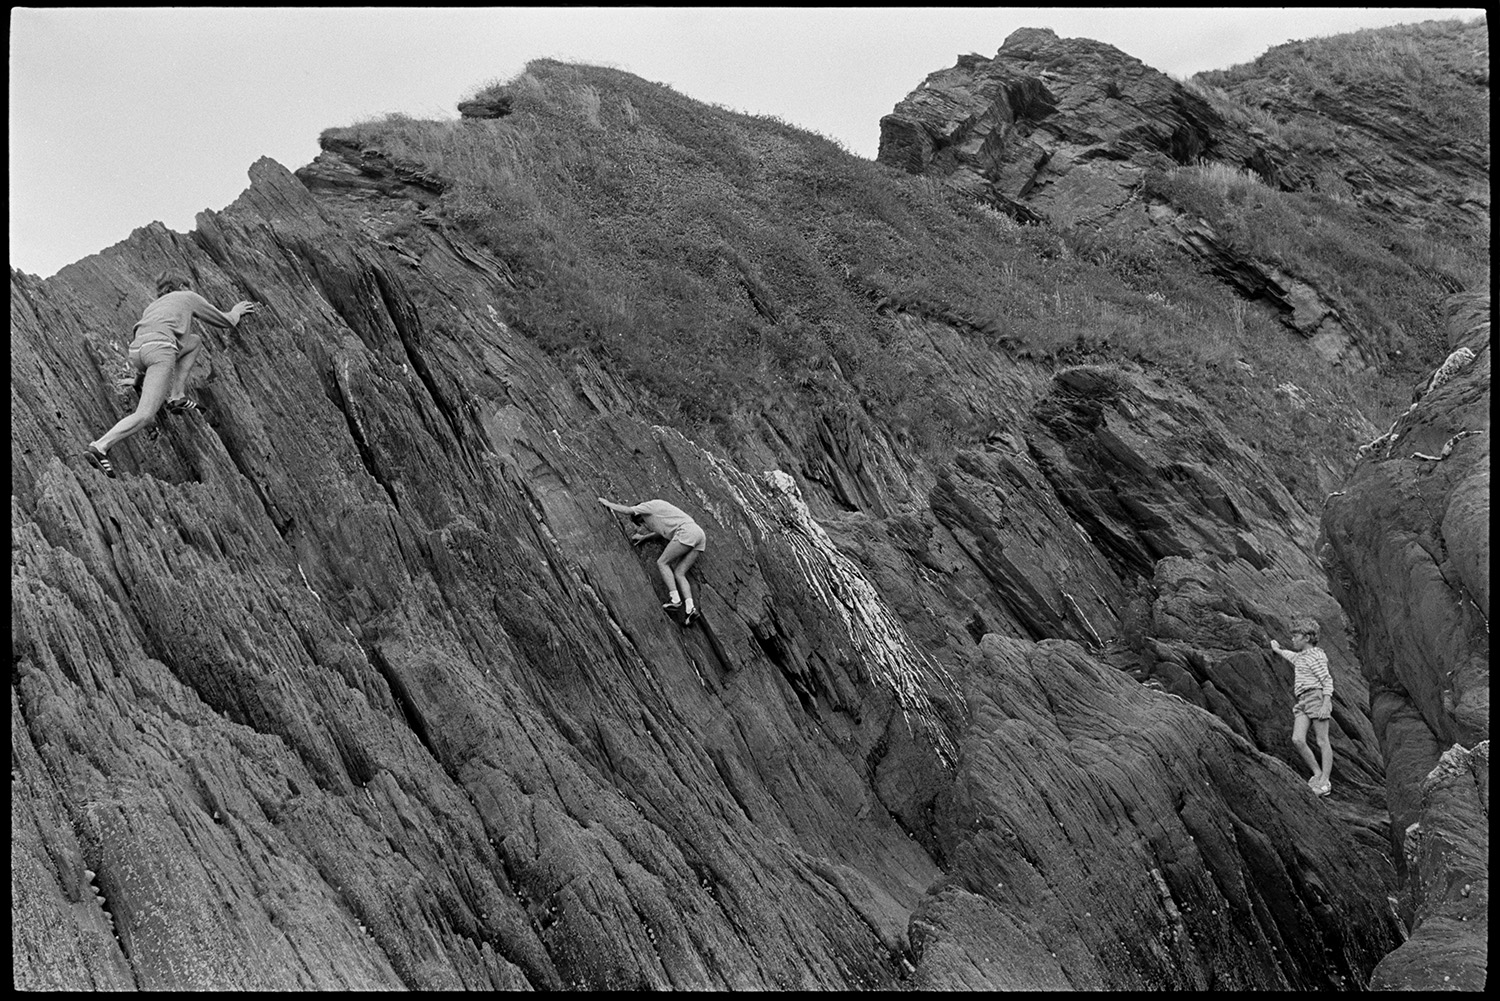 Entrance to tunnel and rocky beach with shop. People climbing on rocks. Boats. 
[Three children climbing on a rocky outcrop from the cliffs at Ilfracombe.]